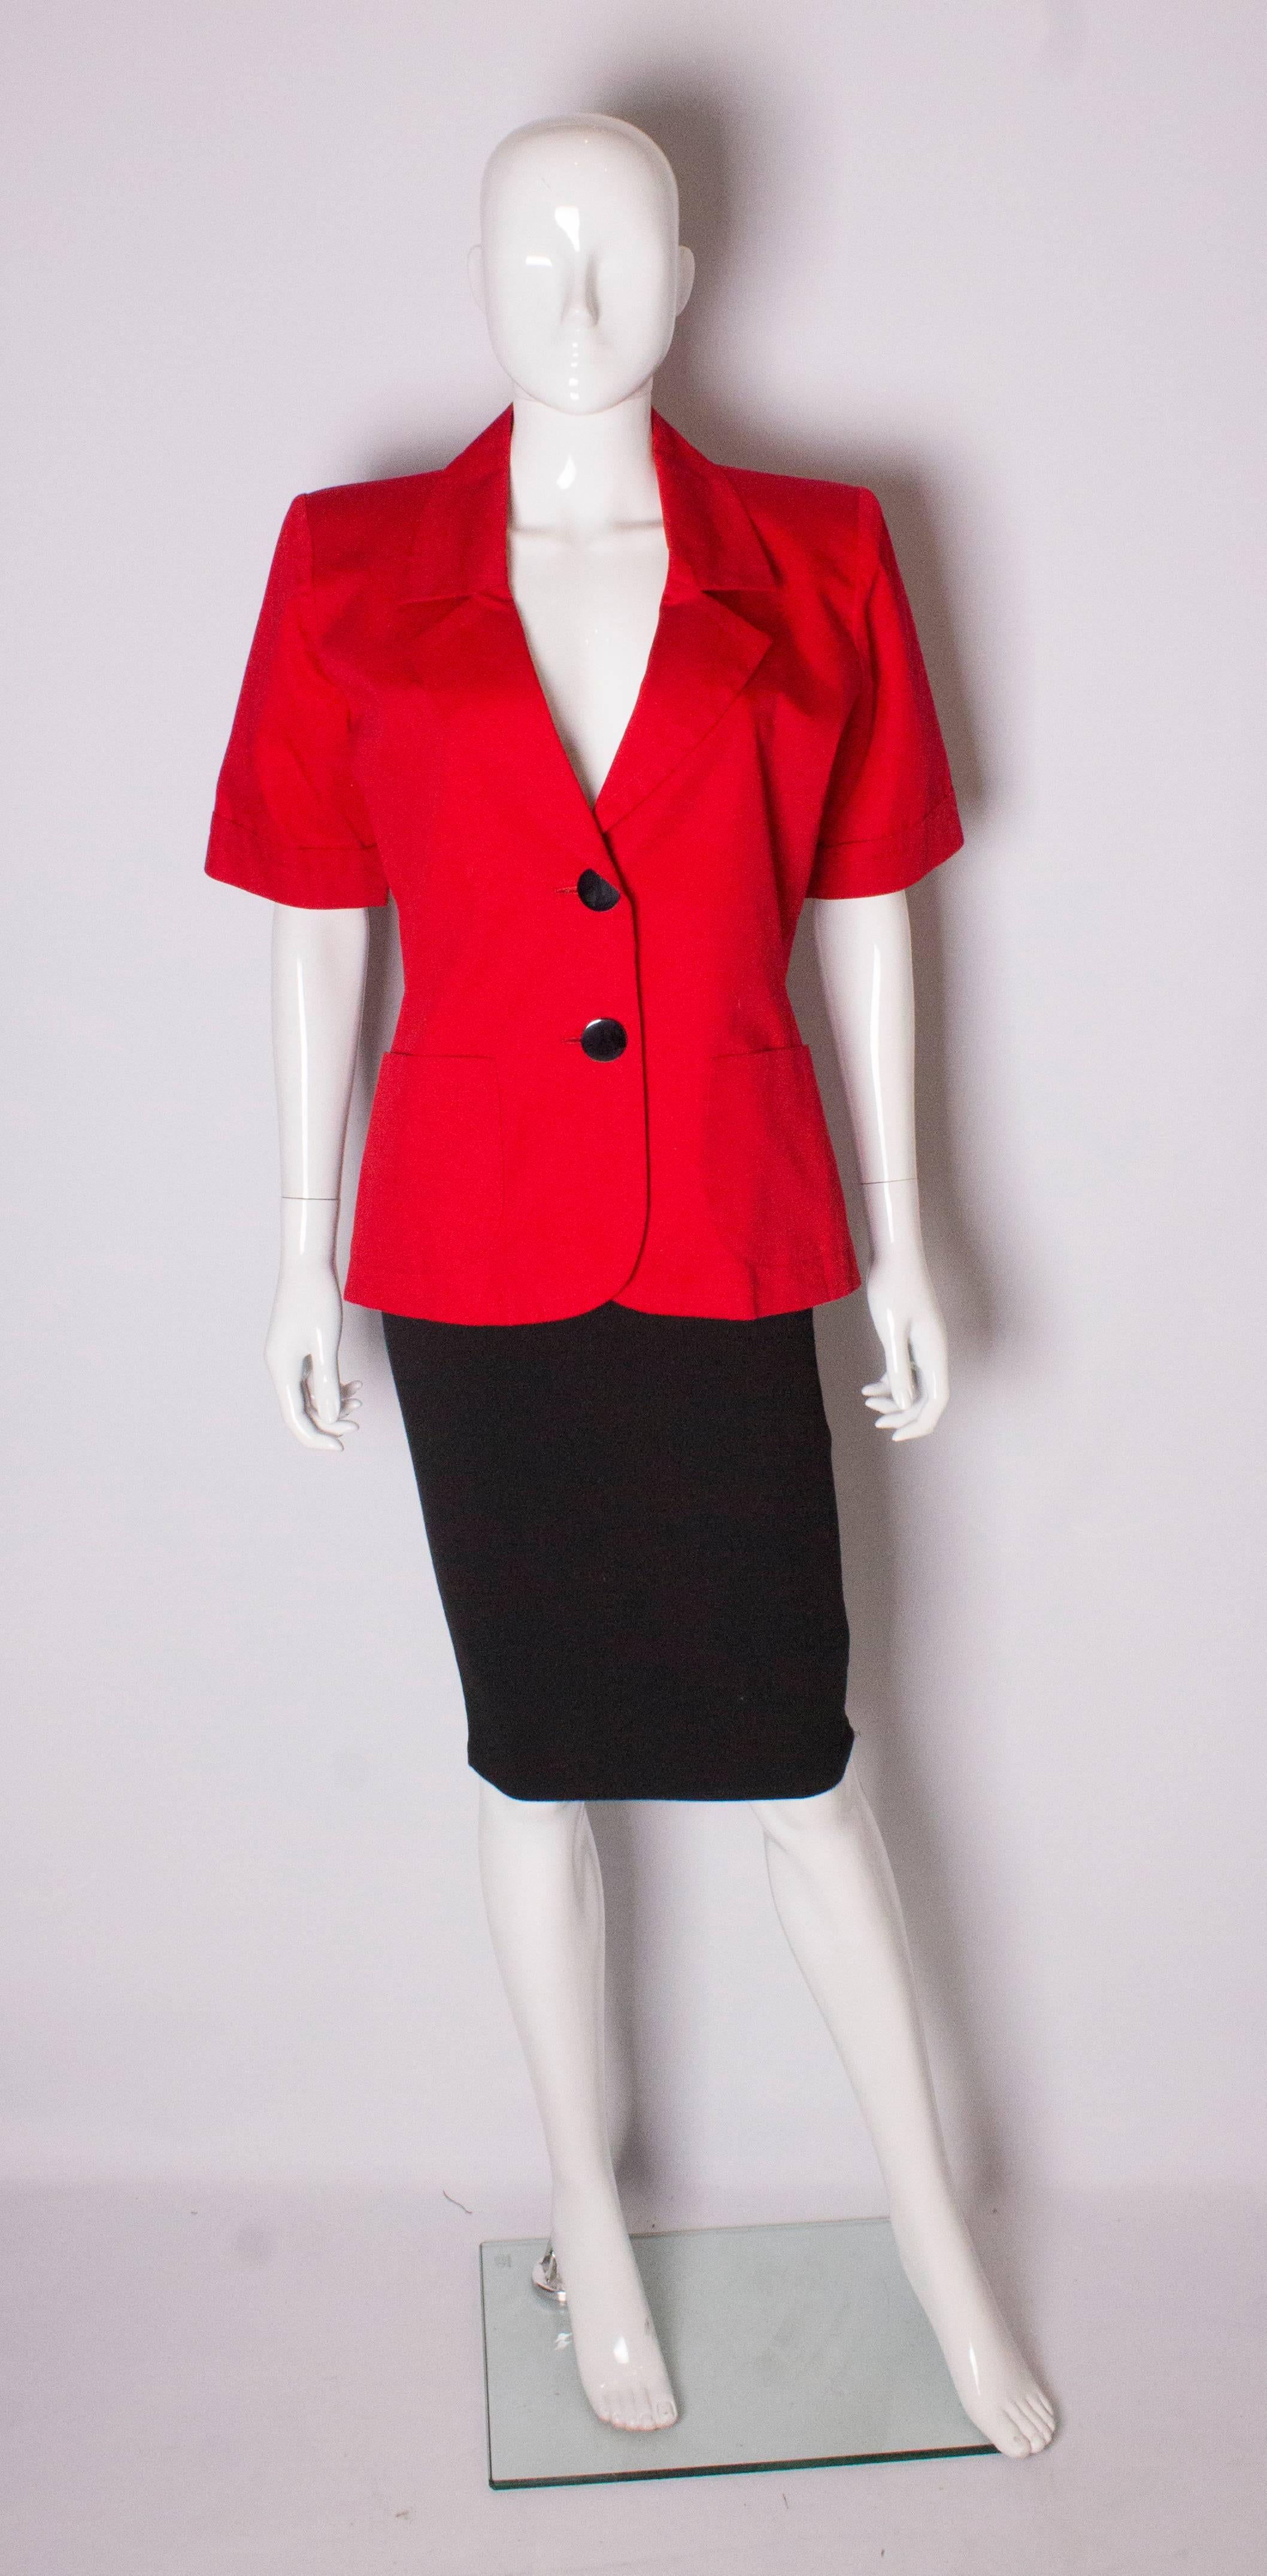 A great short sleeved jacket by Yves Saint Laurent , Variation line. The jacket has 2 large buttons at the front and 2 pockets at waist level.